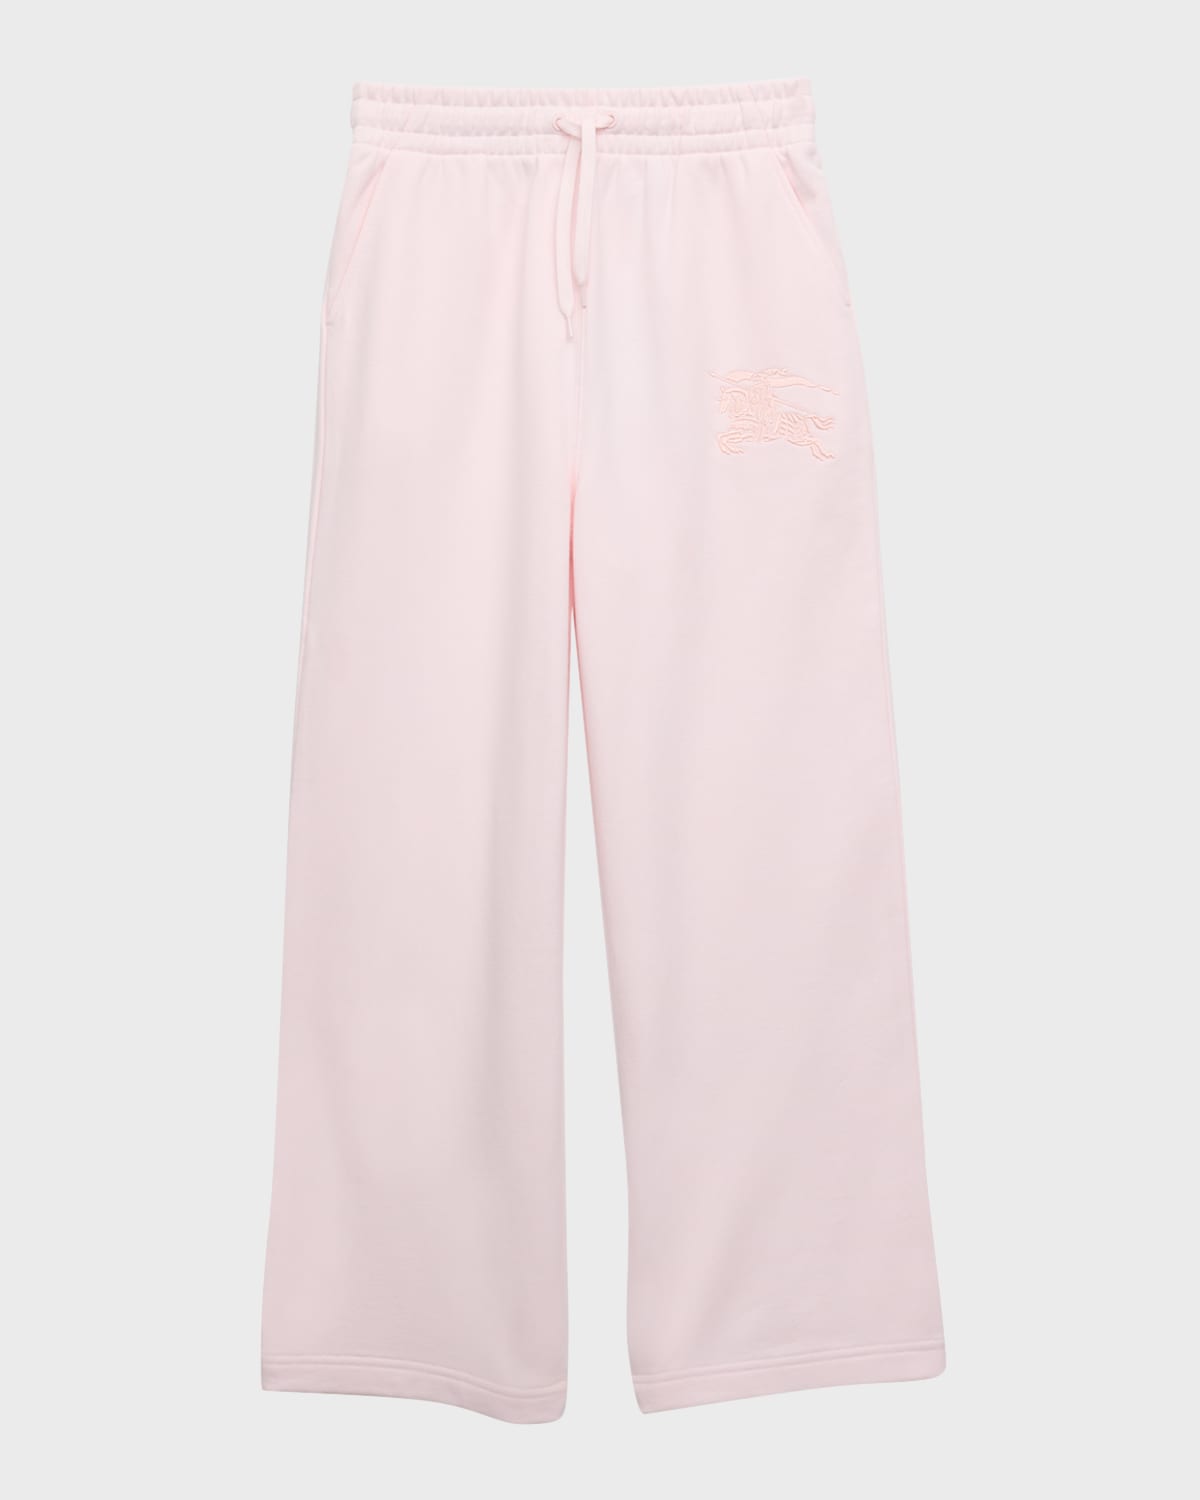 Burberry Kids' Girl's Aubrey Embroidered Equestrian Knight Design Sweatpants In Alabaster Pink